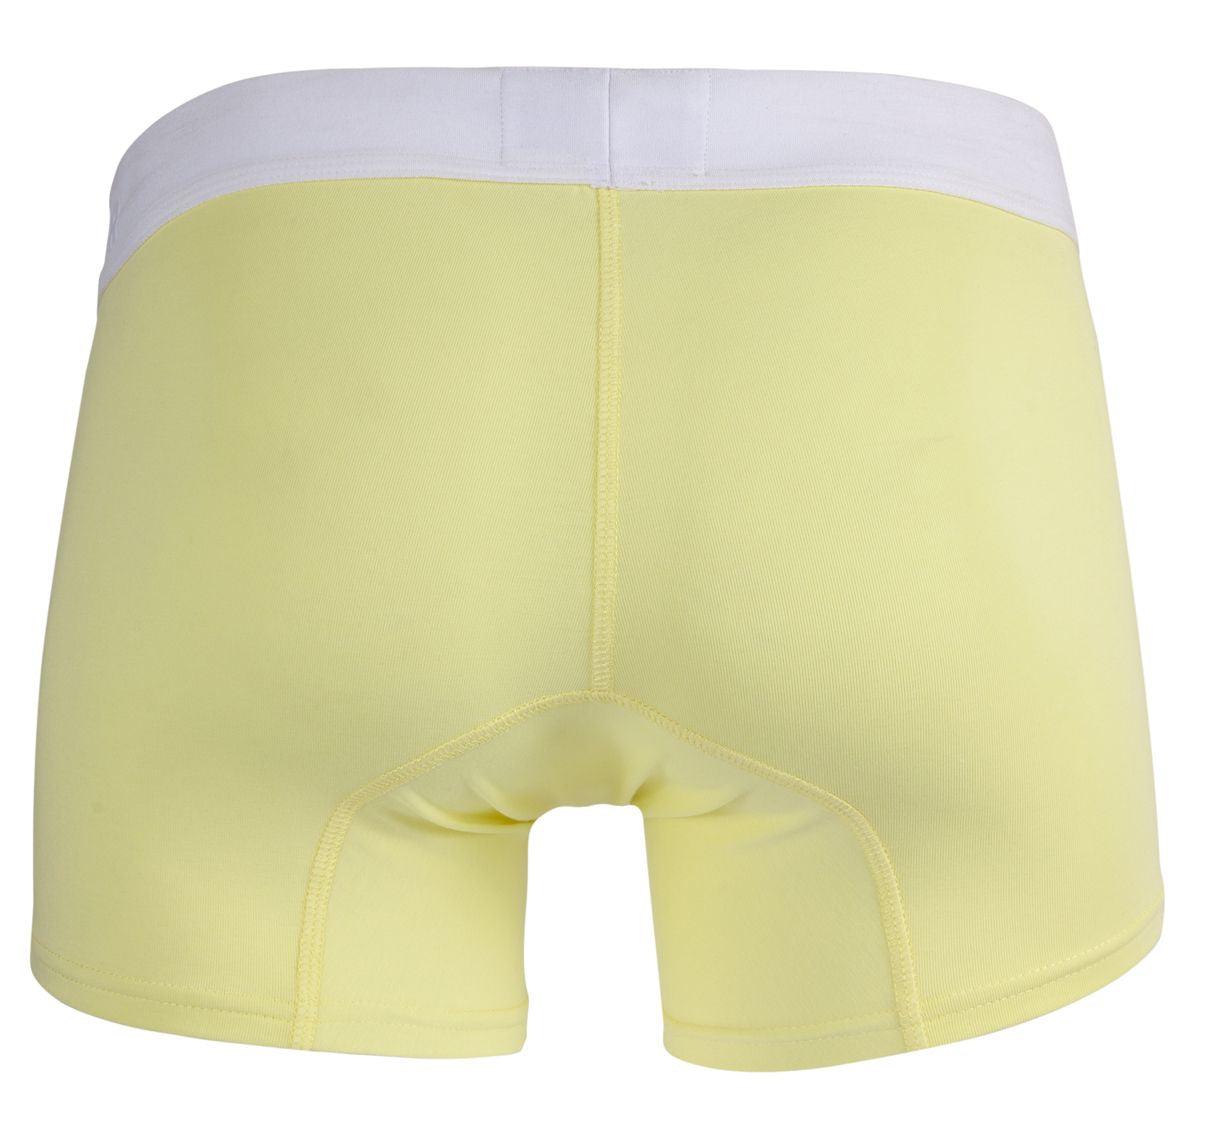 image of product,Tethis Trunks - SEXYEONE